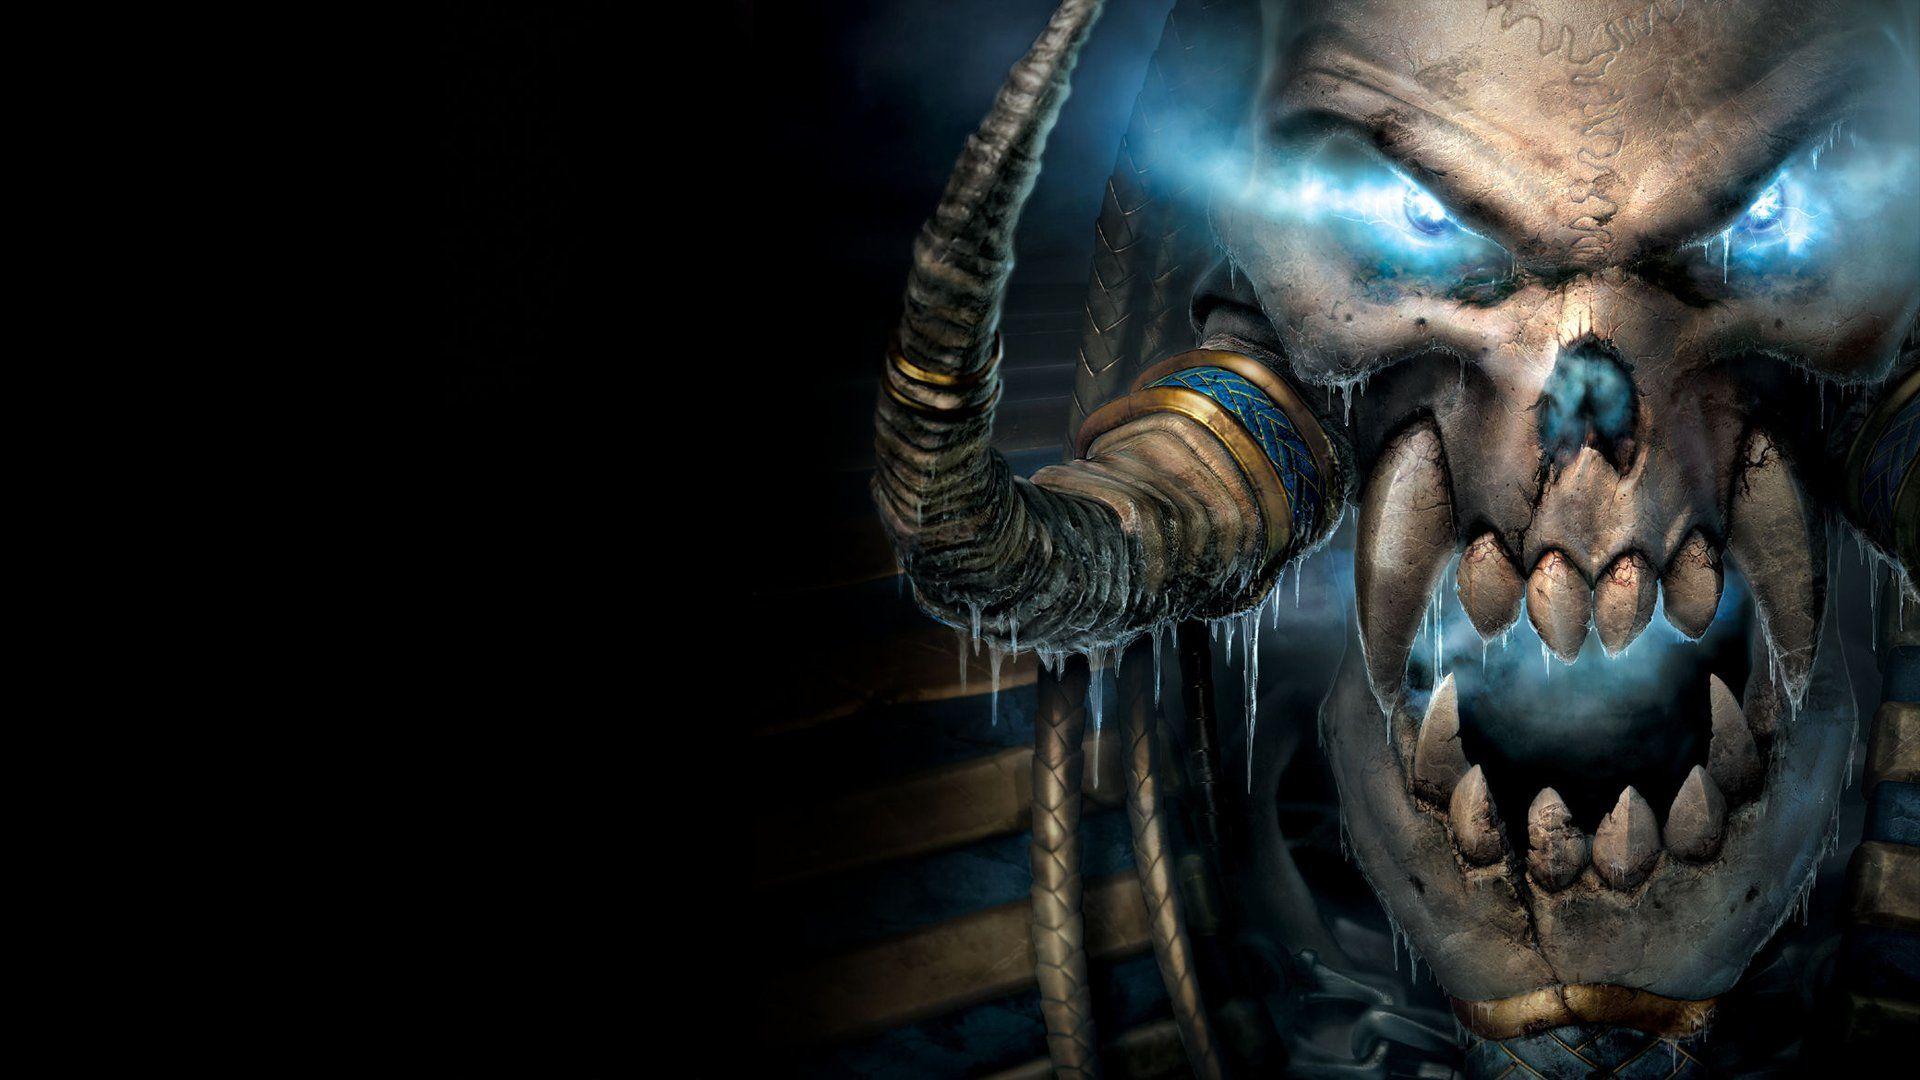 Warcraft III: Reign of Chaos HD Wallpaper. Background Image